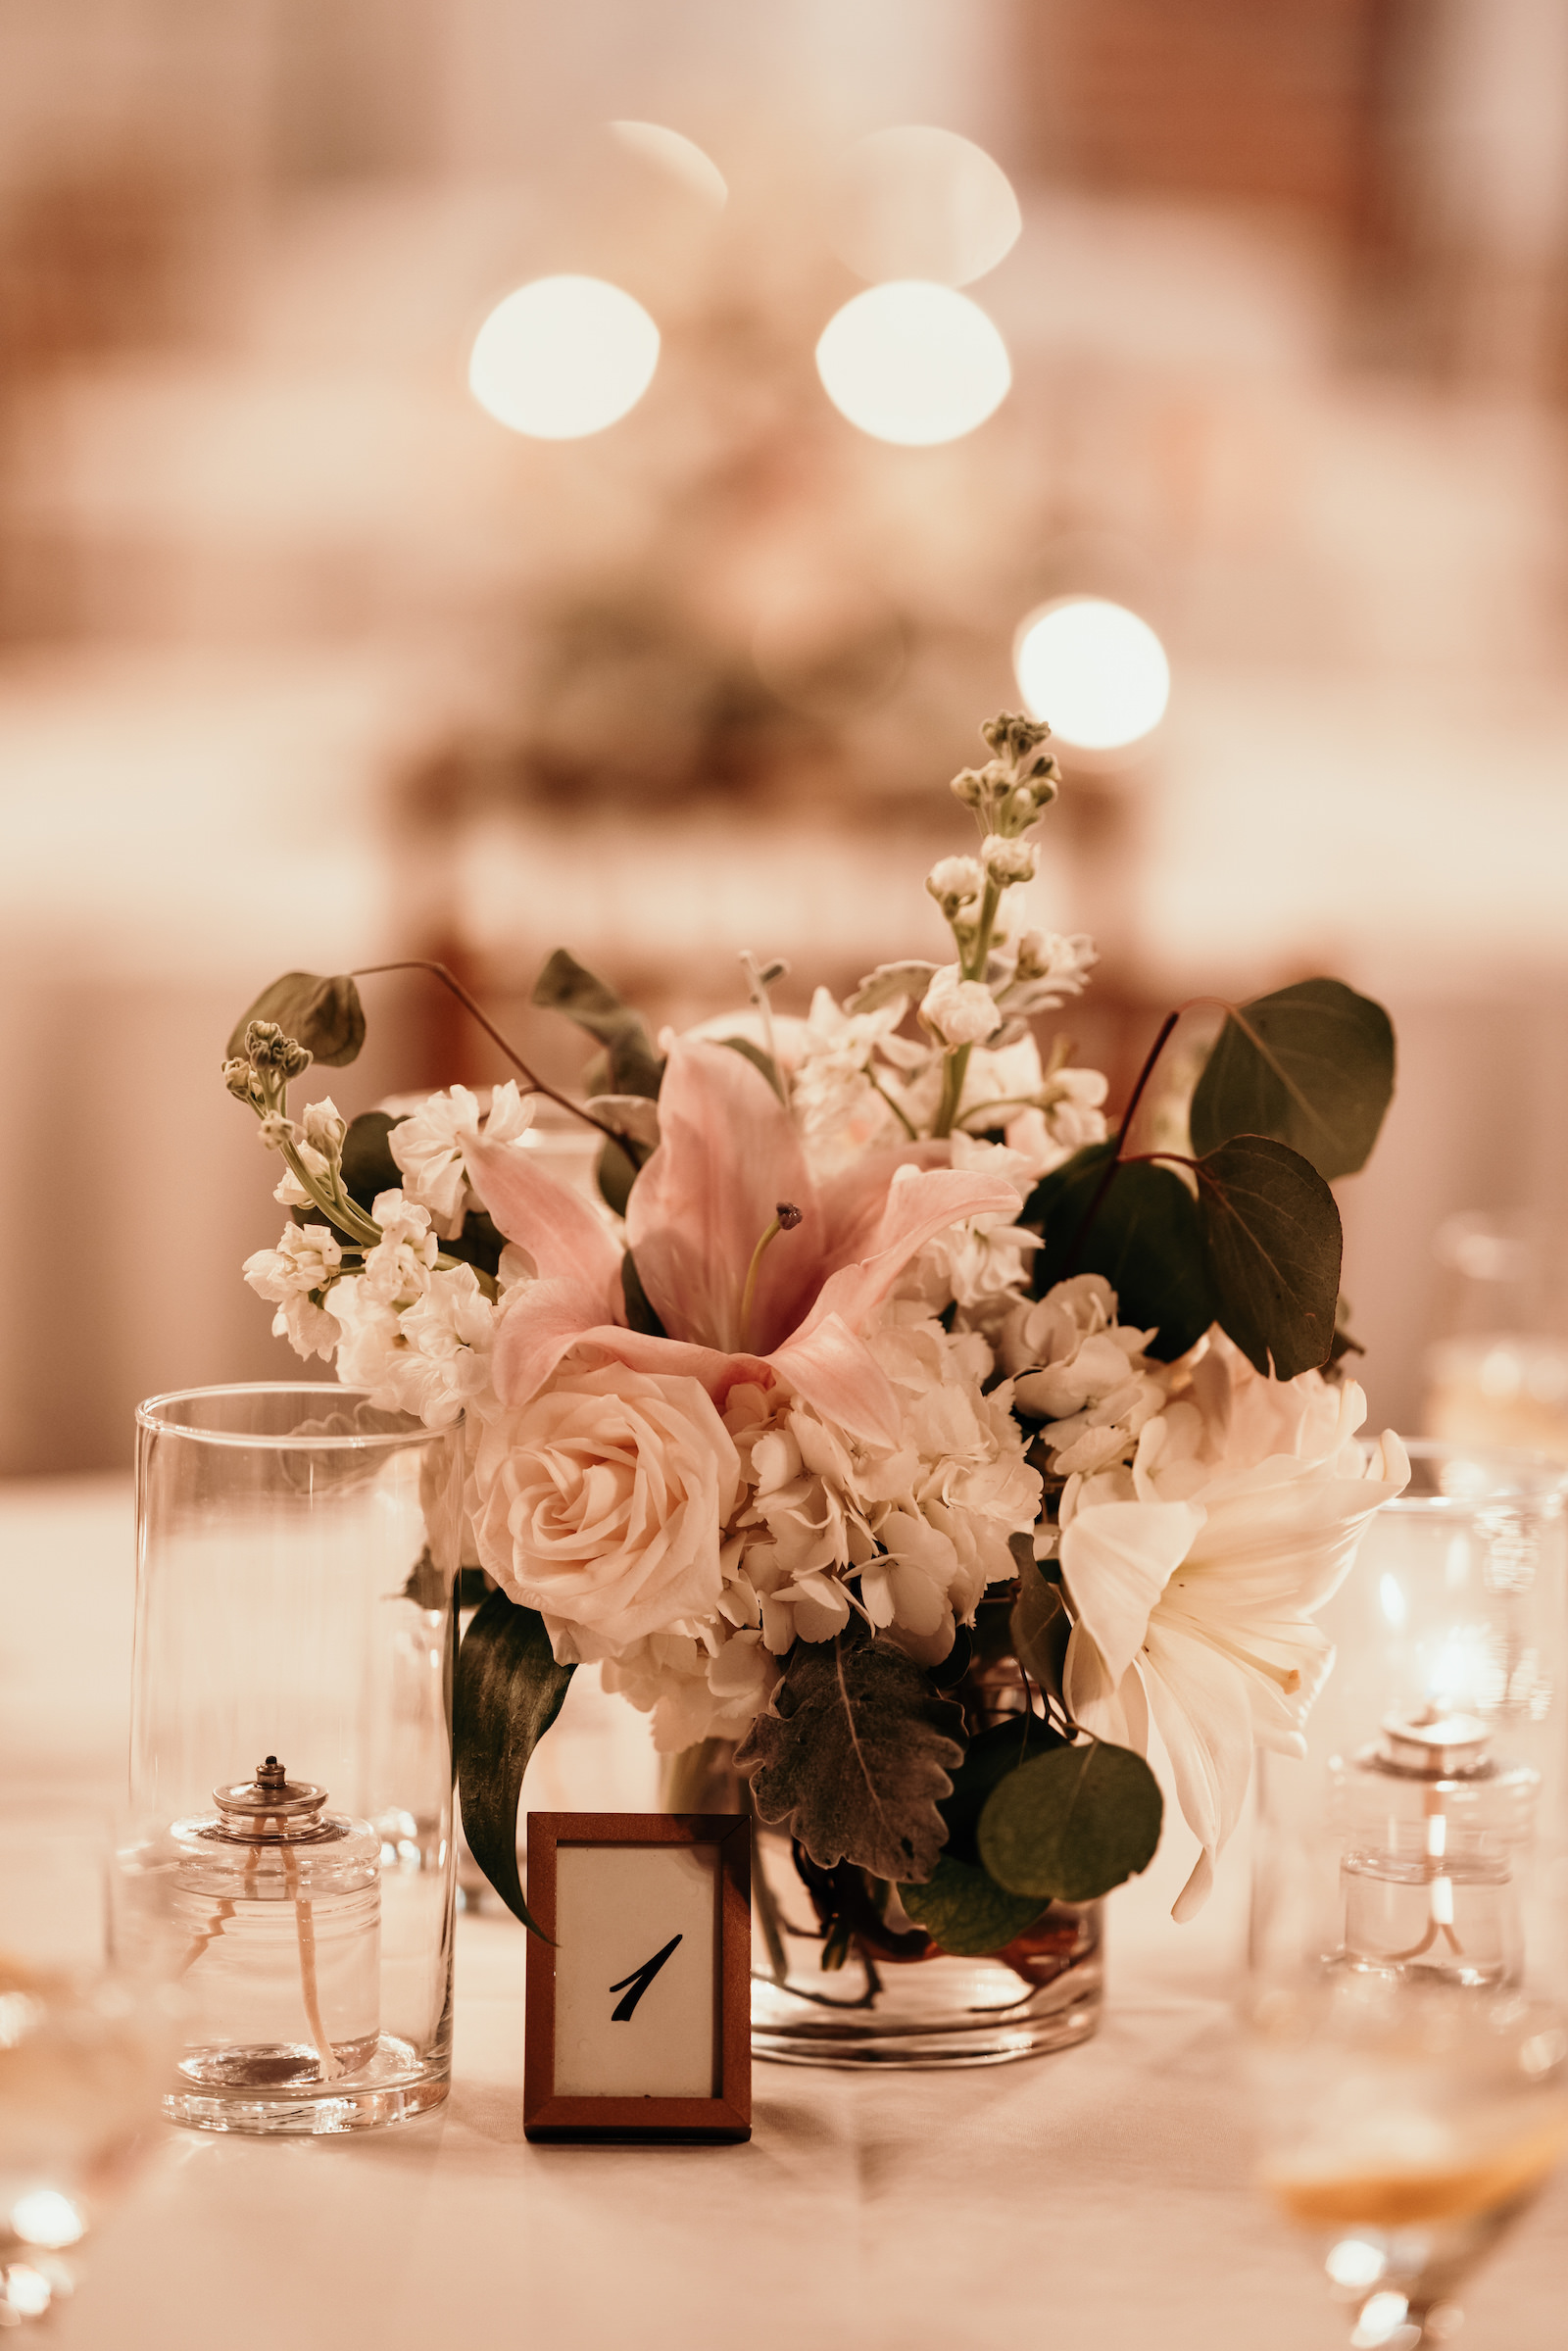 Elegant Wedding Reception Decor, Low Floral Centerpiece with Mixed Stems, White Roses, Blush Pink Flowers and Greenery Eucalyptus with Candlelight